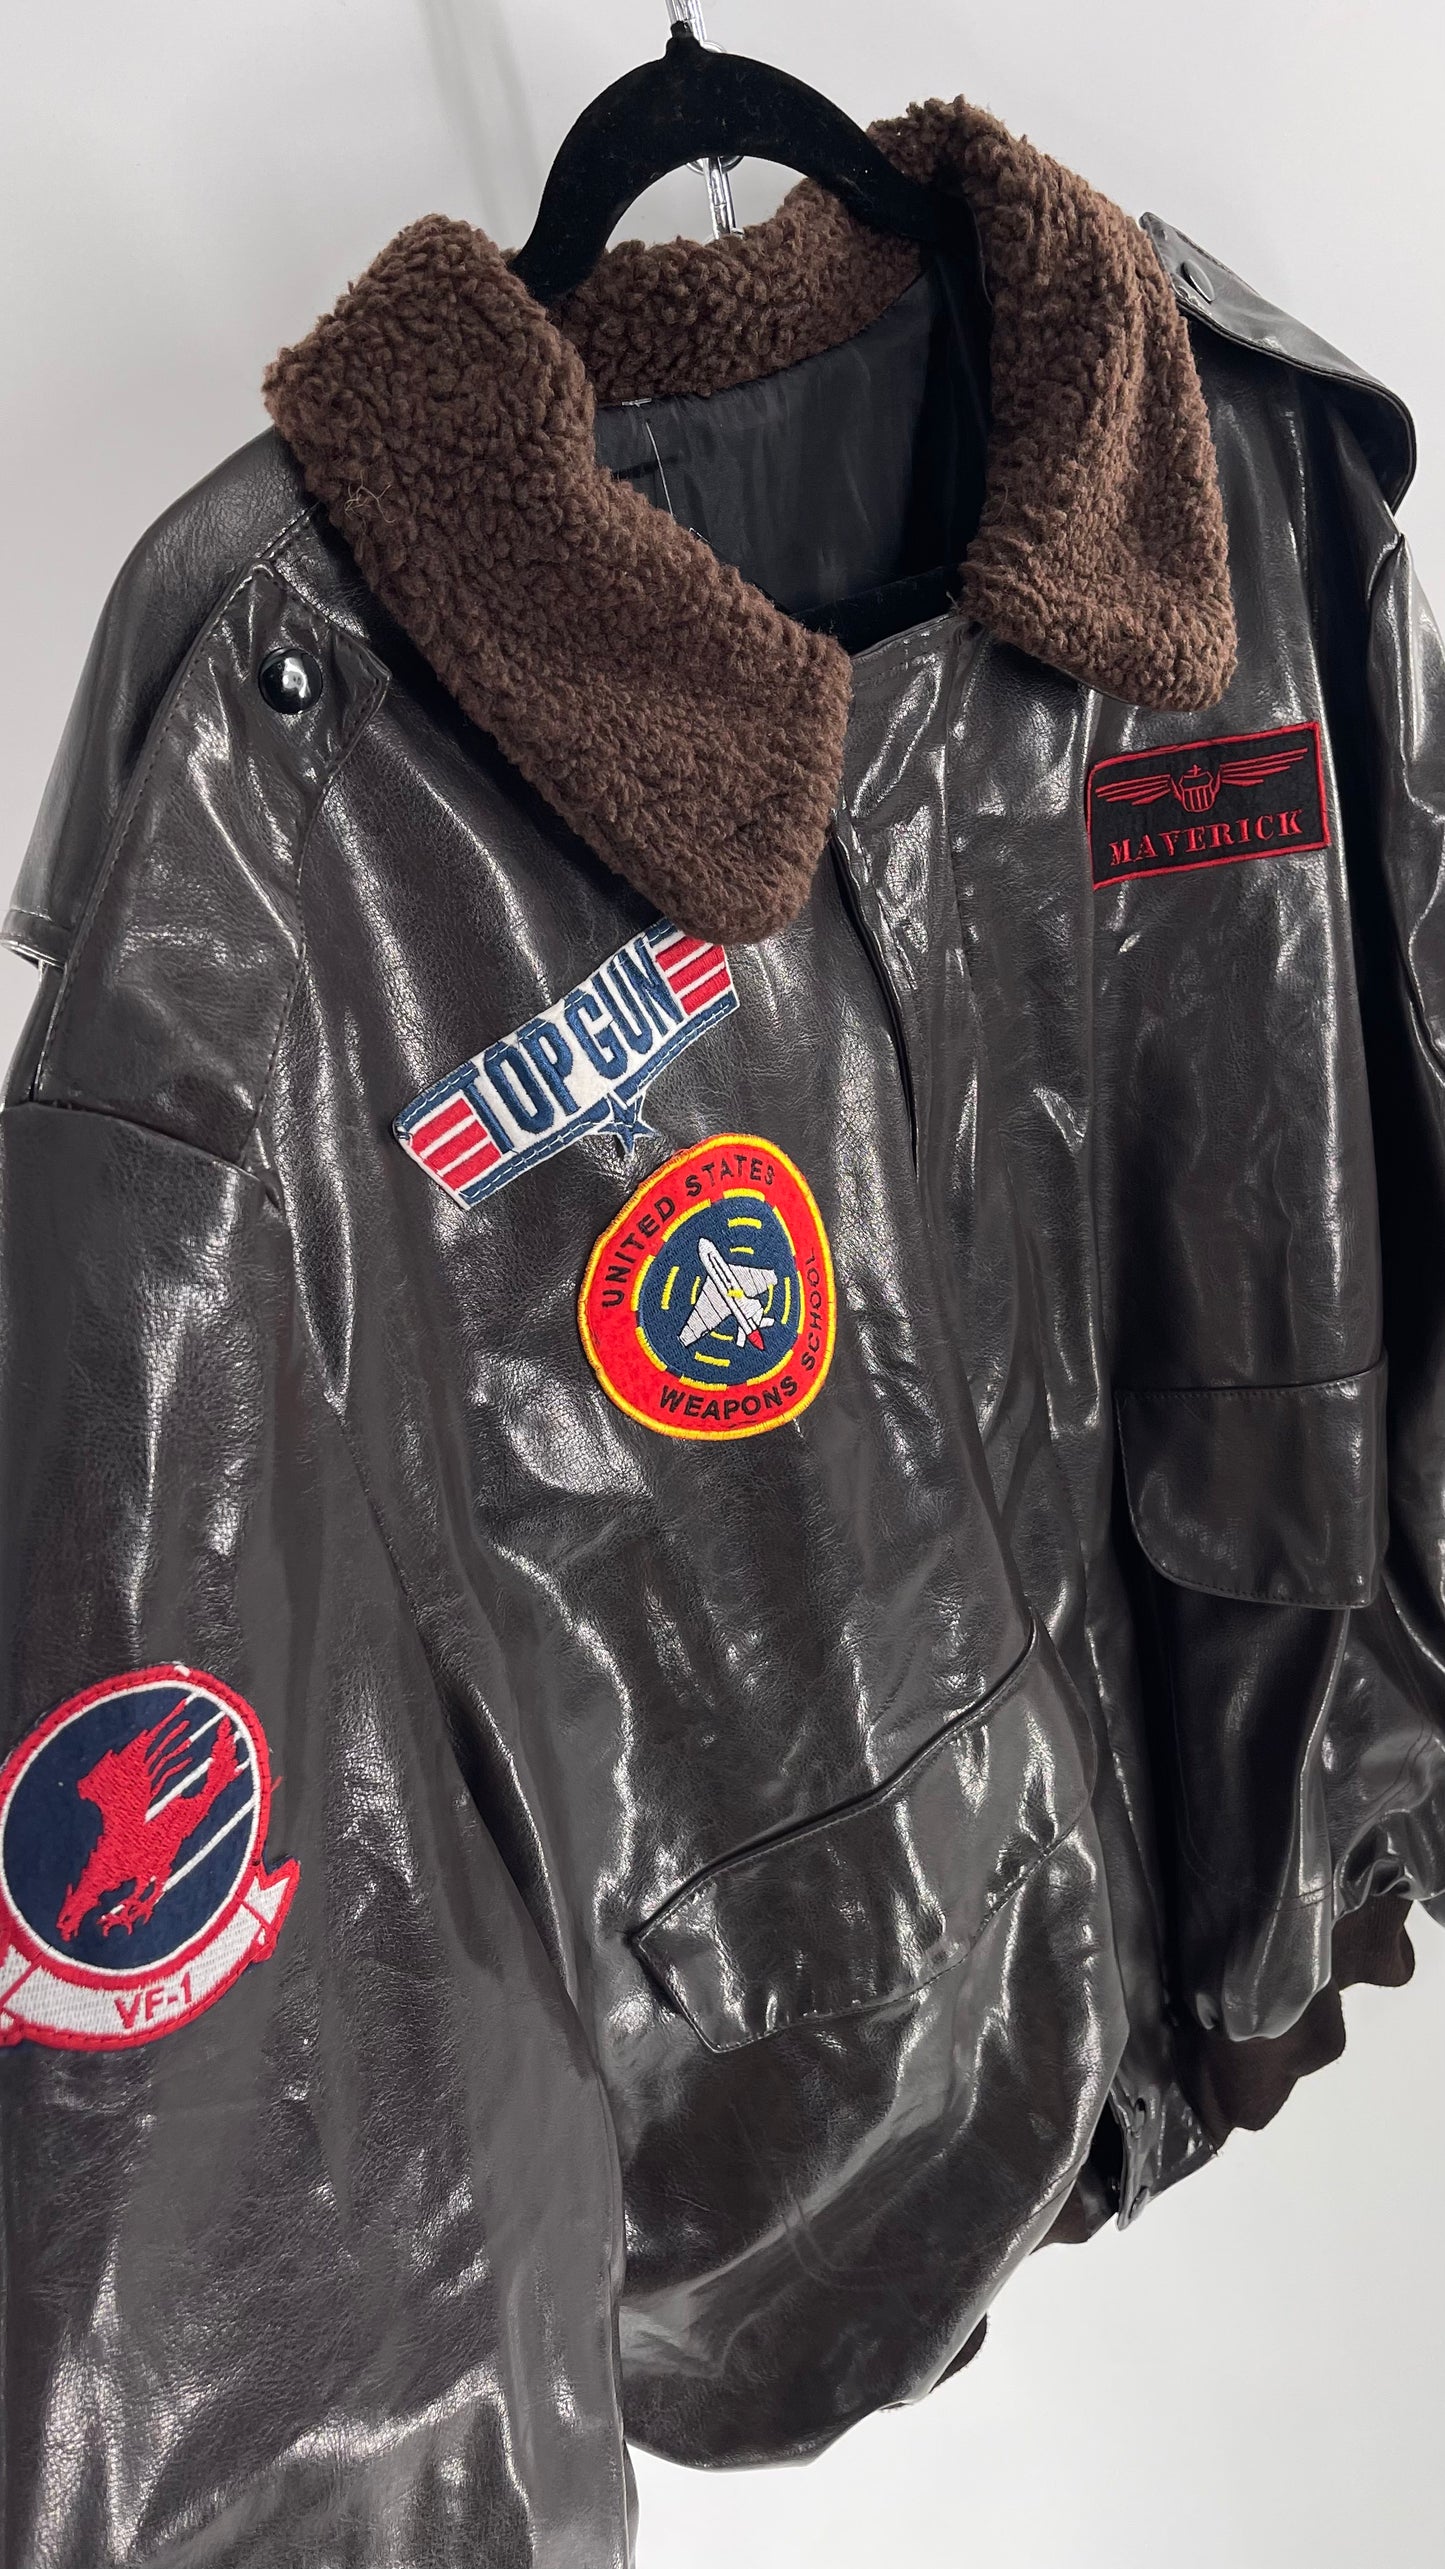 Vintage Dark Brown Top Gun Bomber Jacket with Patches and Teddy Sherpa Collar (Large)